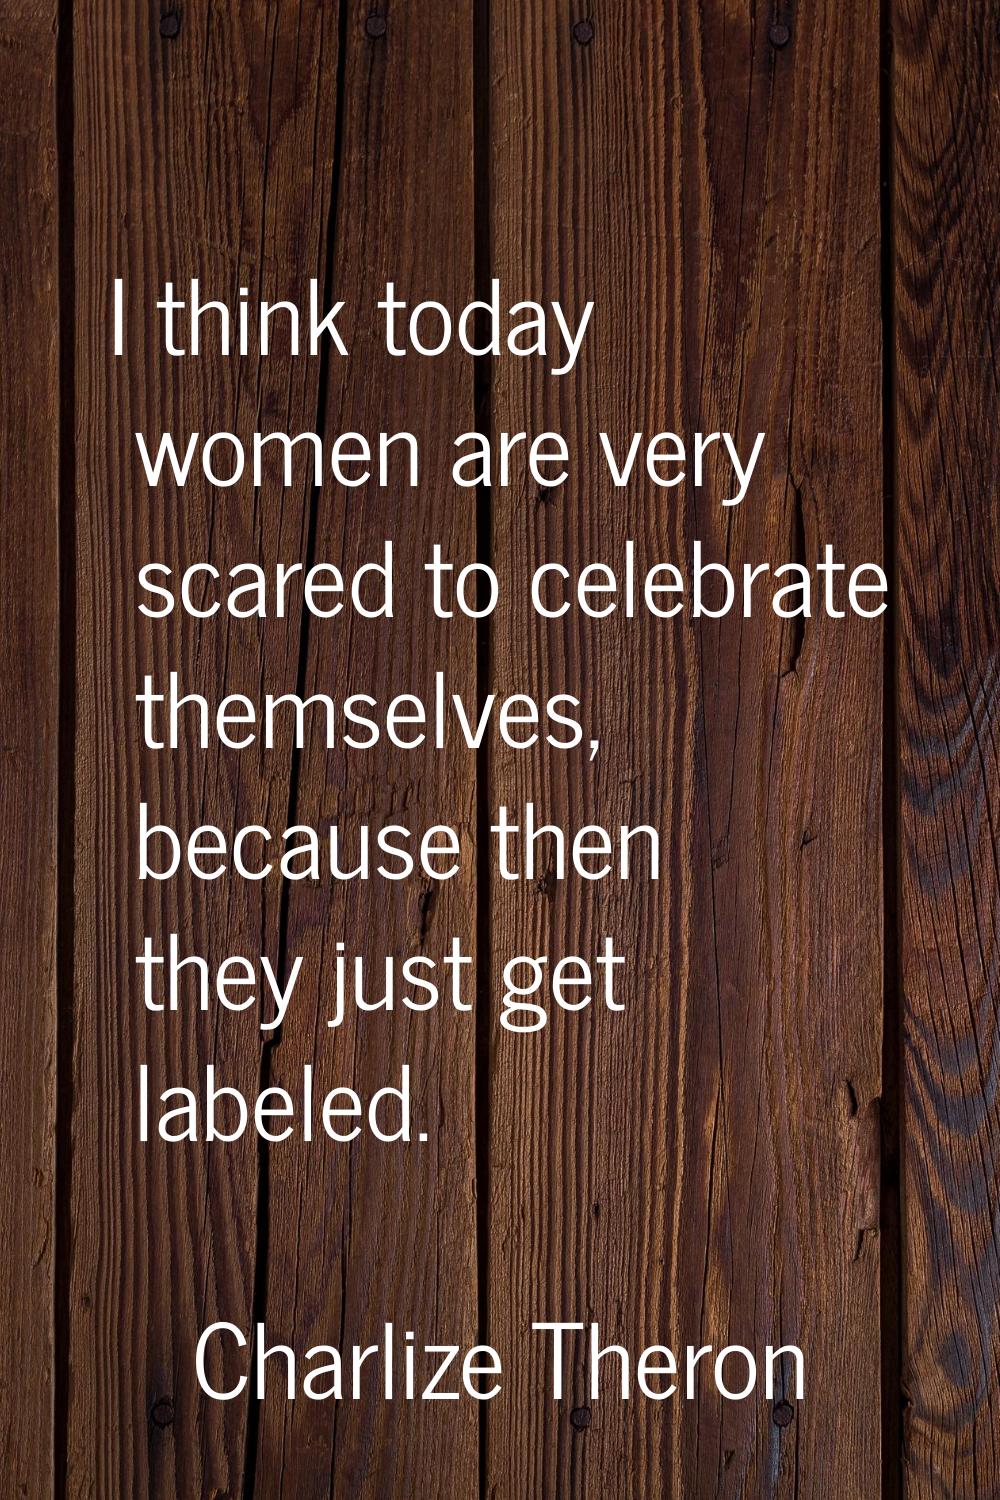 I think today women are very scared to celebrate themselves, because then they just get labeled.